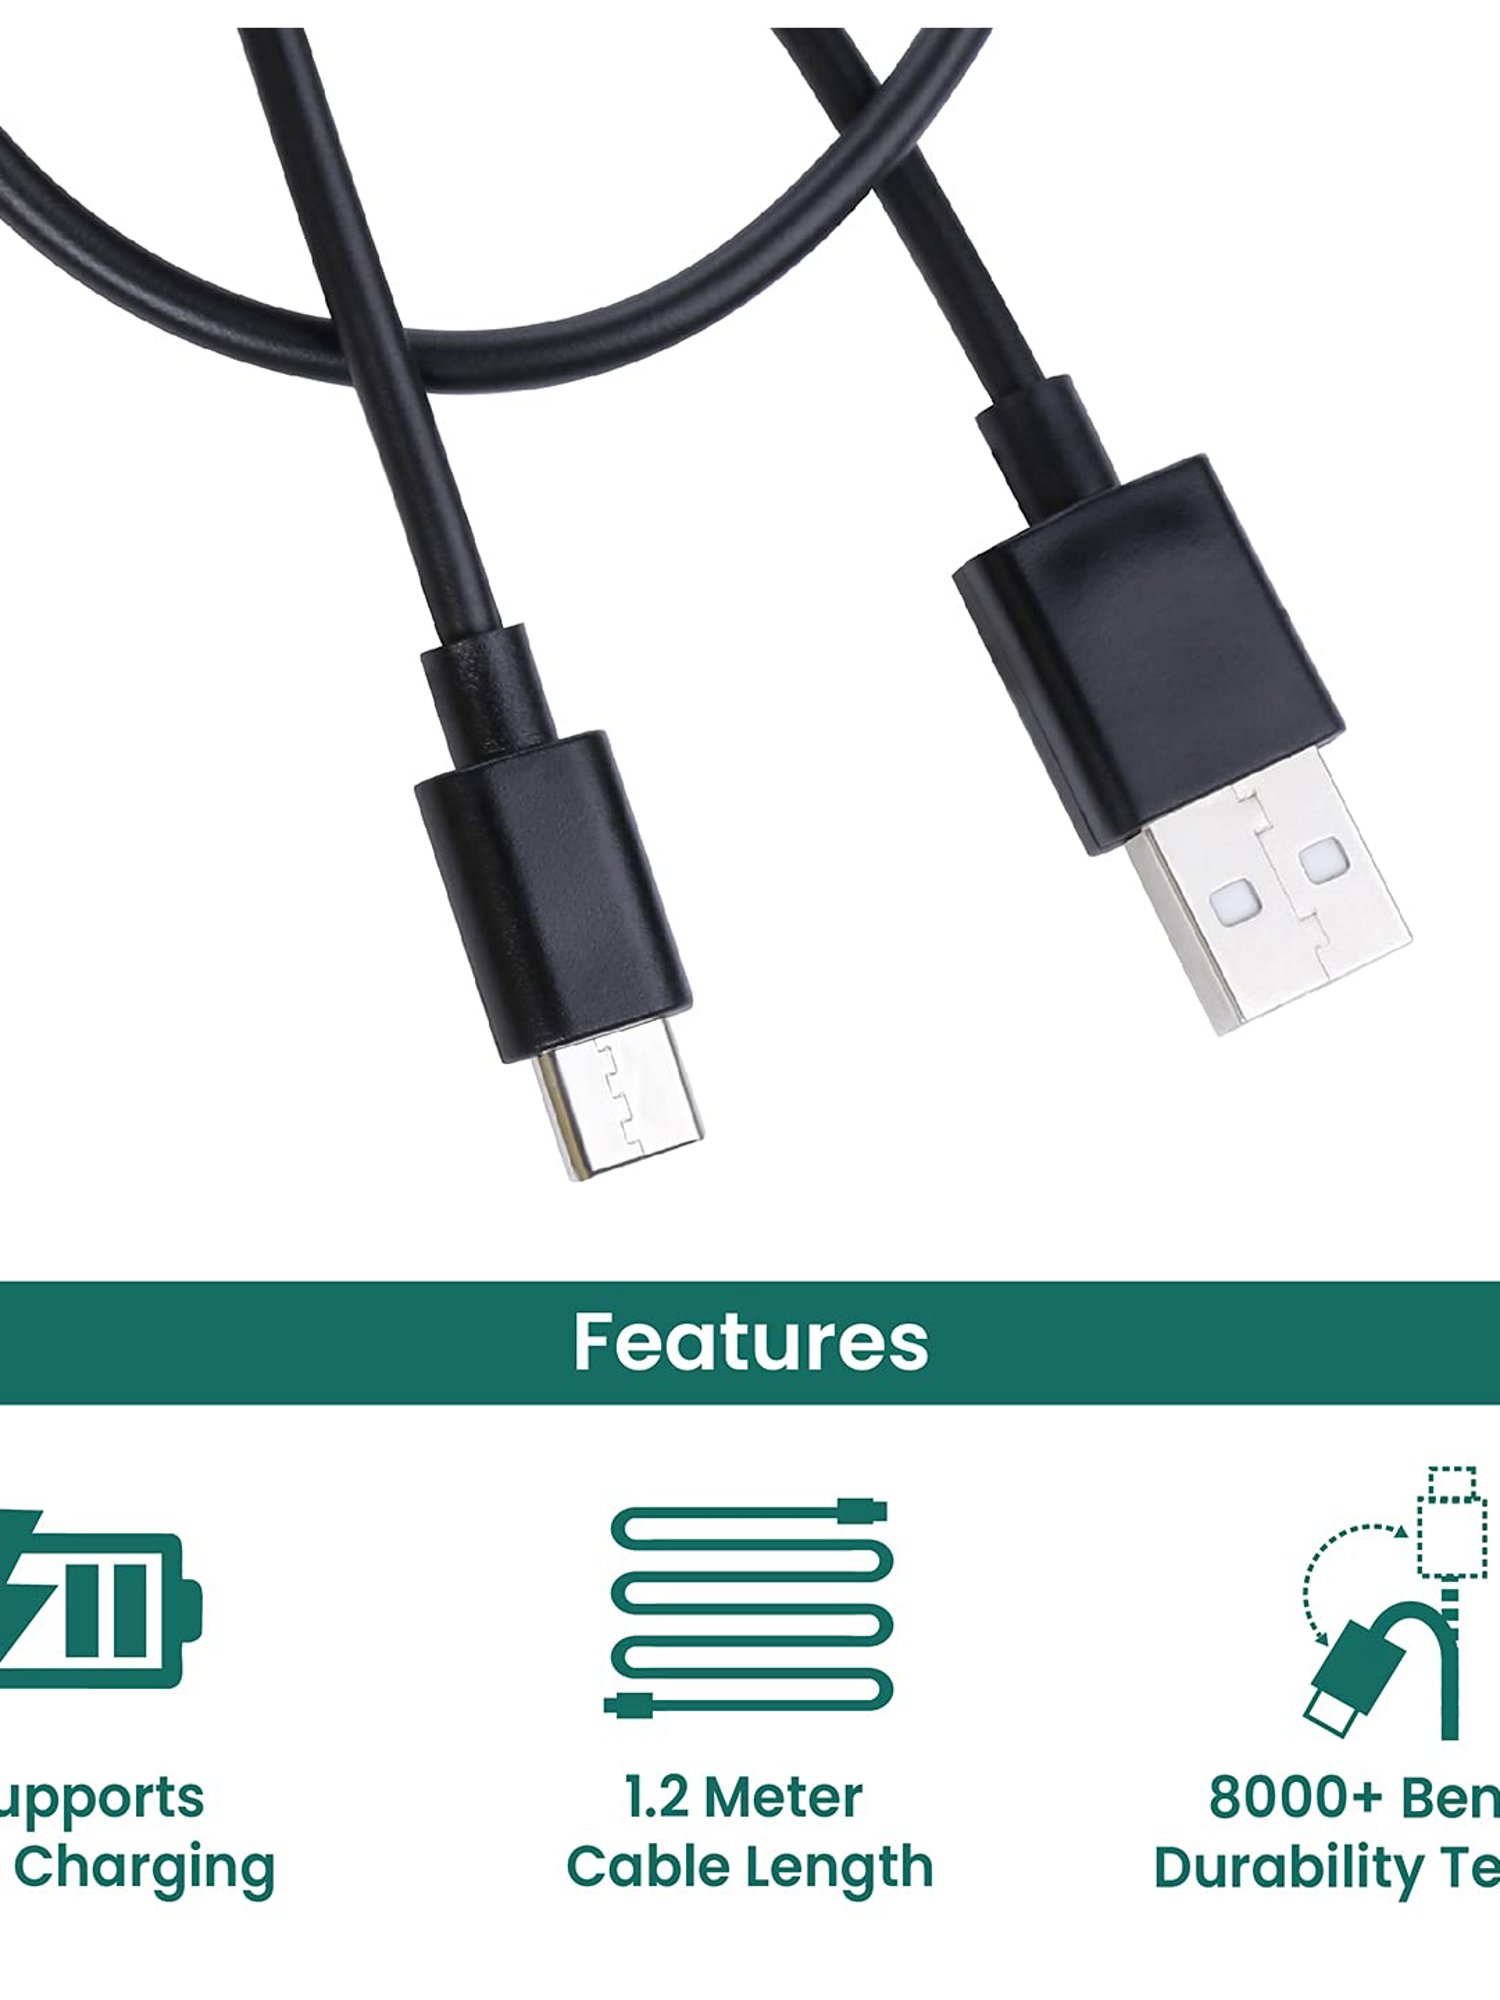 TODOO Fast Quick Charging USB Cable Compatible with Xiaomi Redmi Note 8  Pro, Redmi Note 9 Pro, Redmi Note 9S, Redmi 9, Redmi Note 8, Redmi 8A,  Redmi